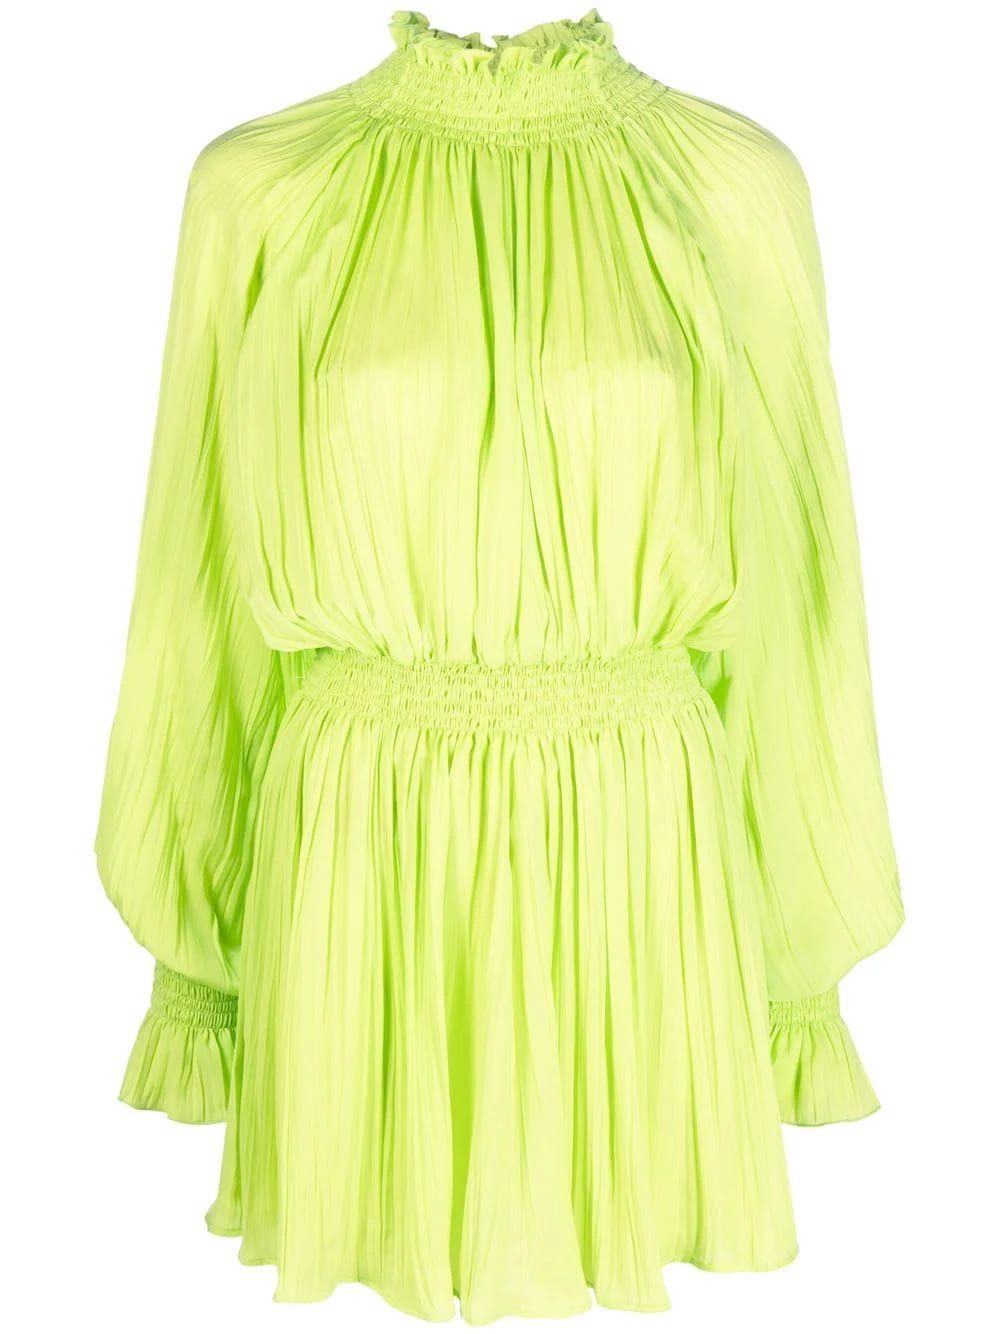 MSGM Short Lime Green Pleated Dress